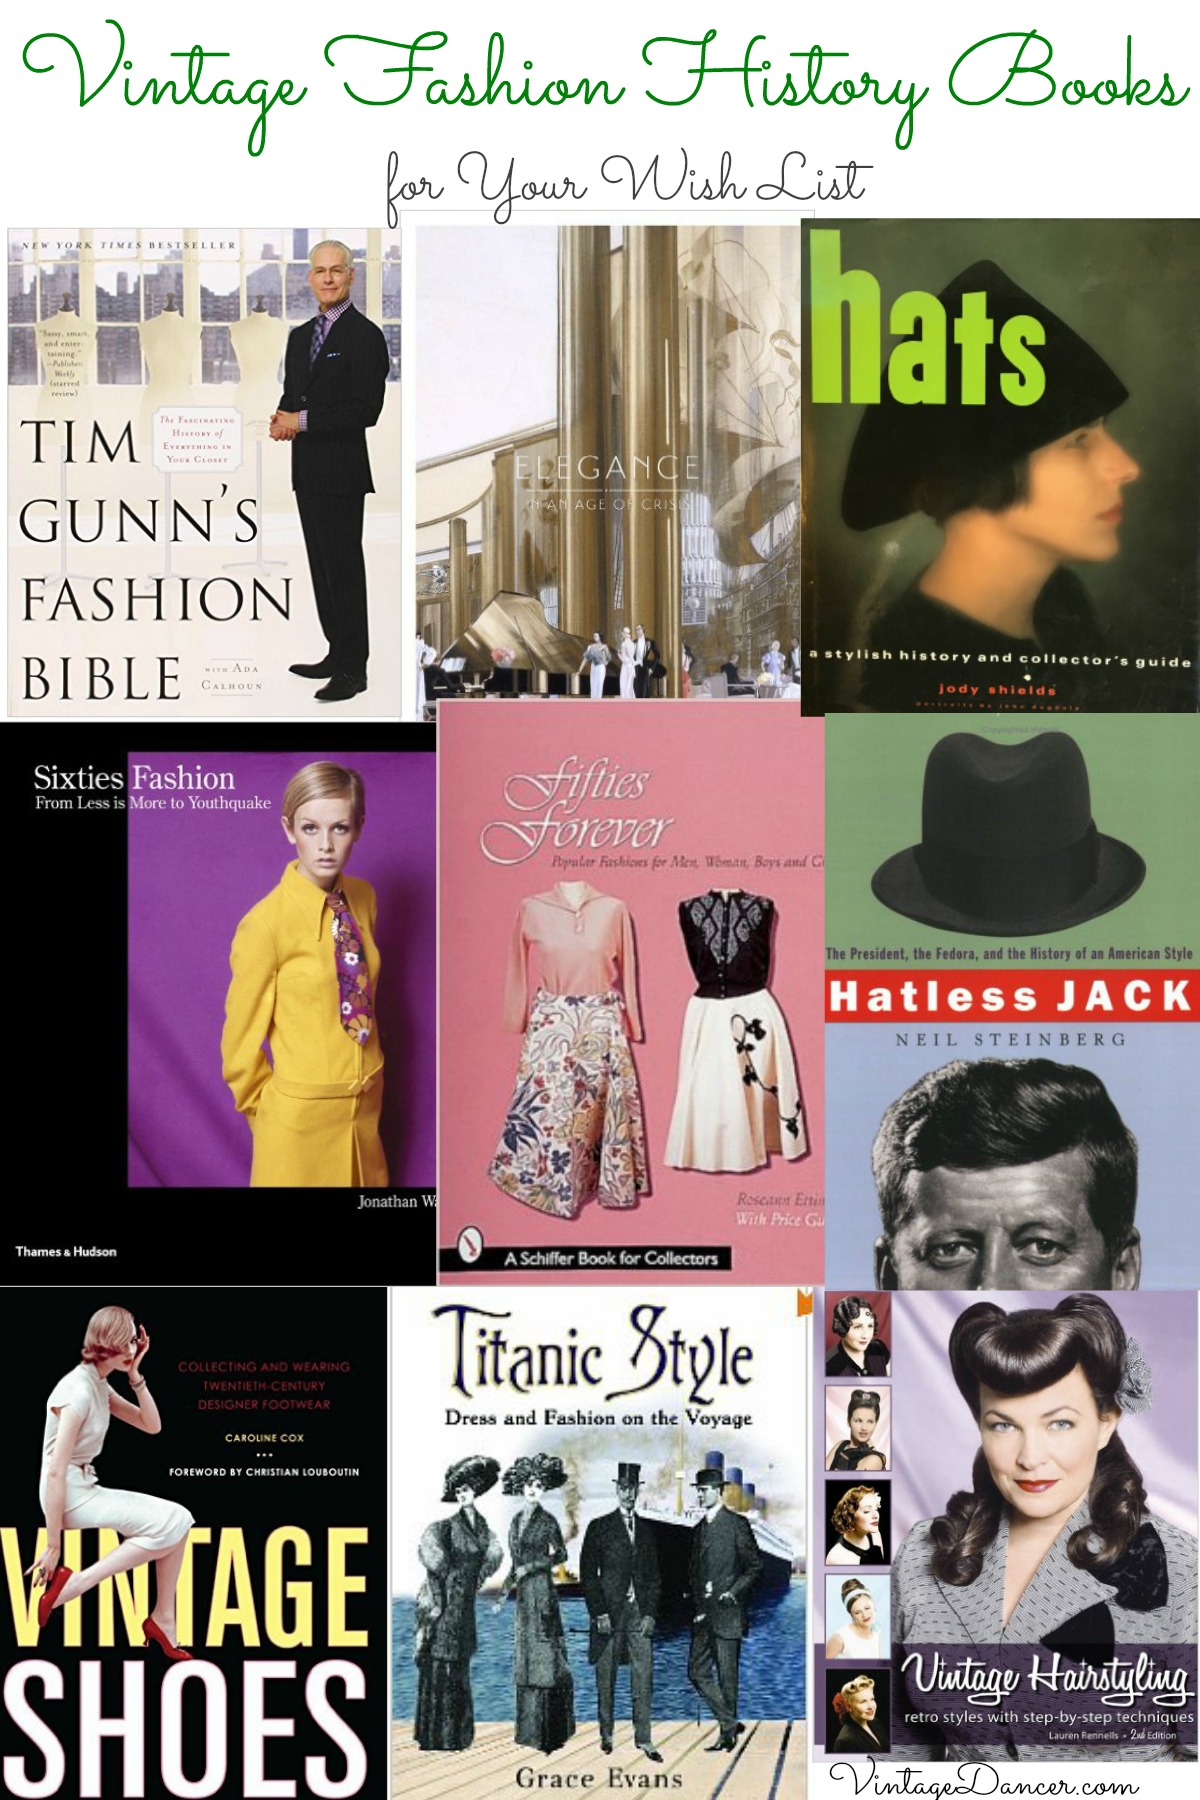 Vintage Fashion History Books for Research 1920s to 1970s